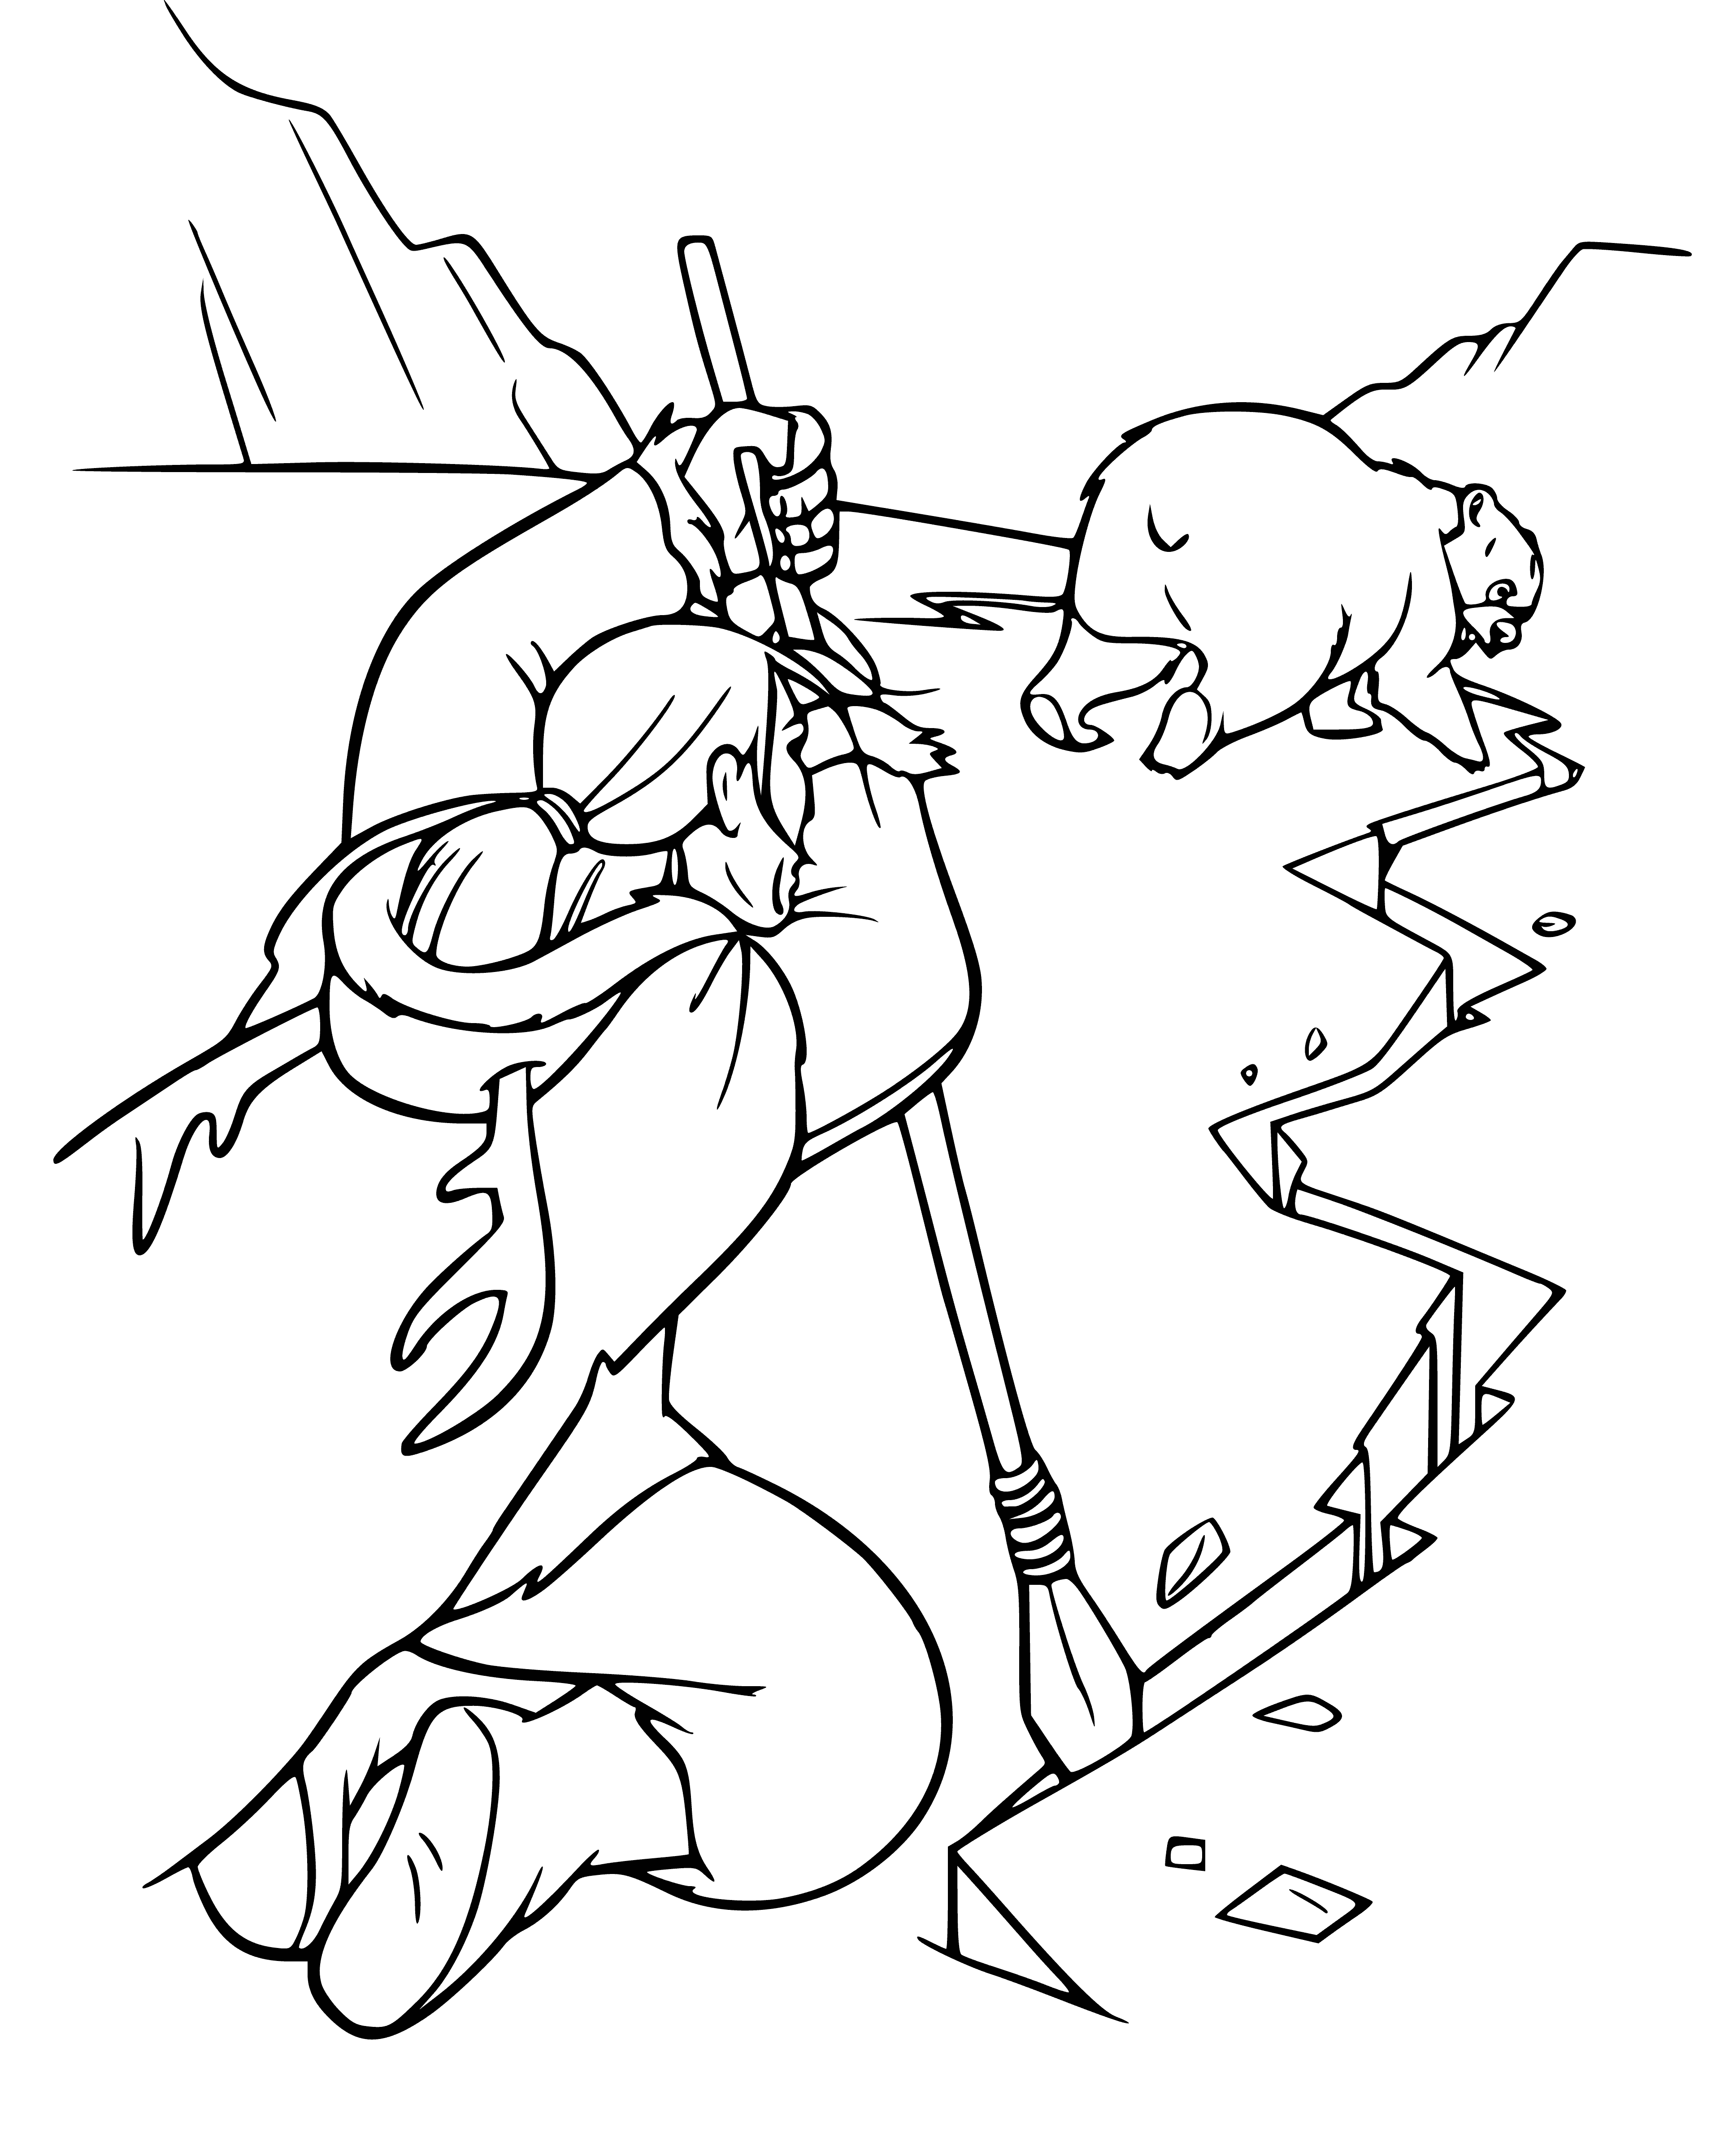 coloring page: A brown bear stands on hind legs, mouth open wide, looking at a jagged ice crack with worry.